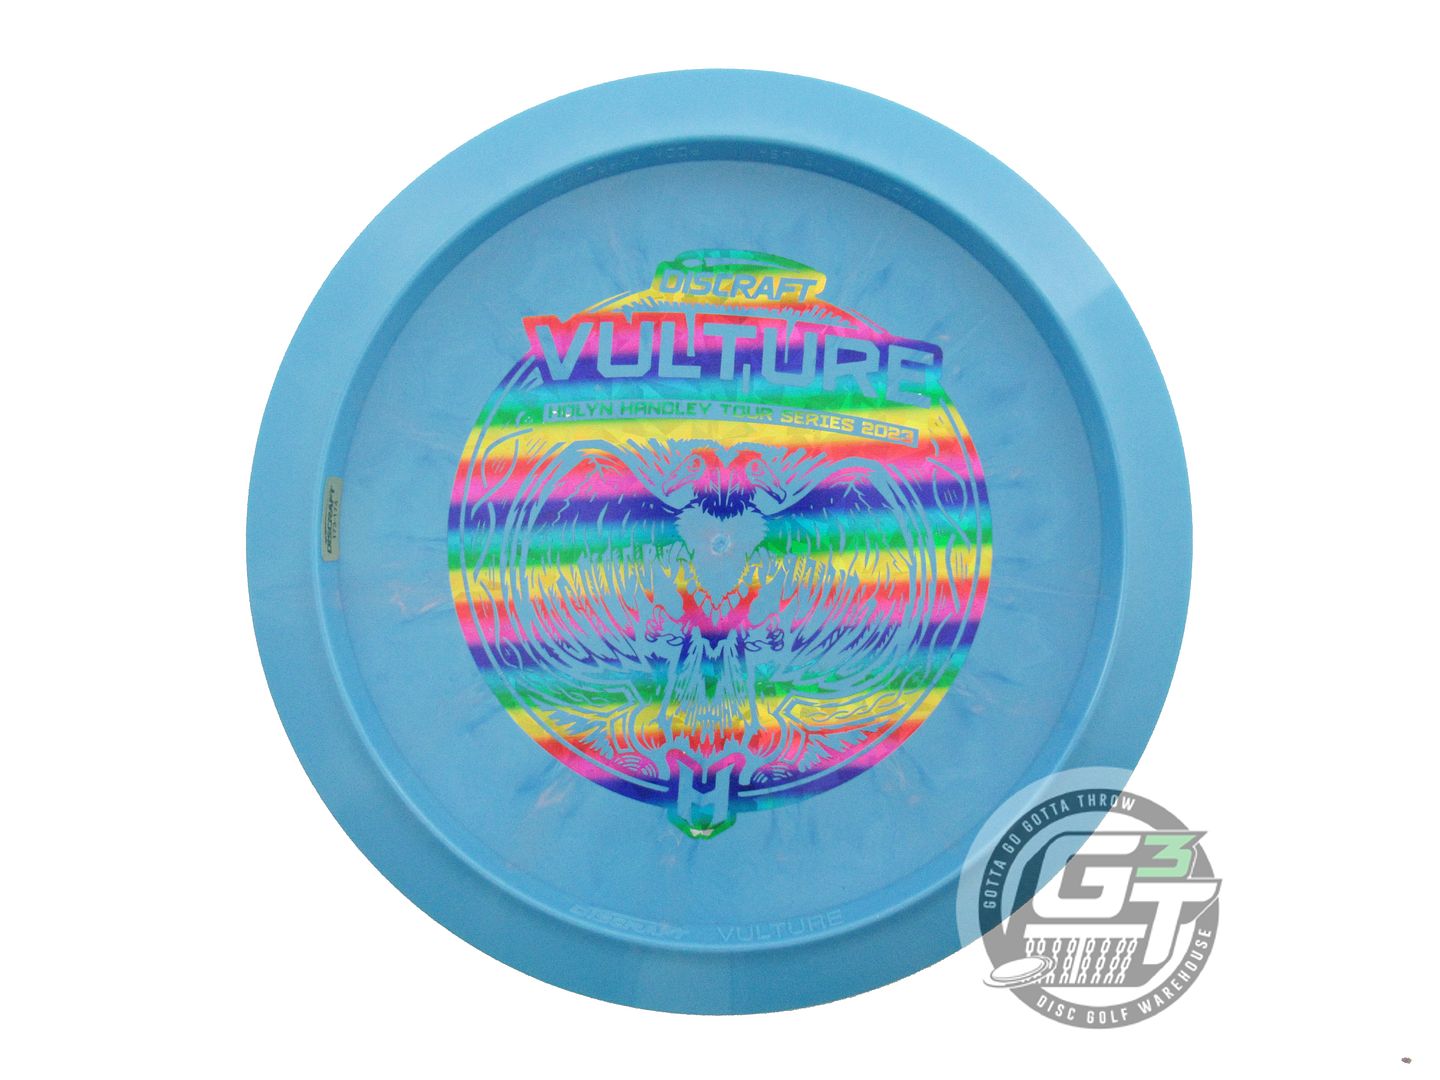 Discraft Limited Edition 2023 Tour Series Missy Gannon Understamp Swirl ESP Thrasher Distance Driver Golf Disc (Individually Listed)